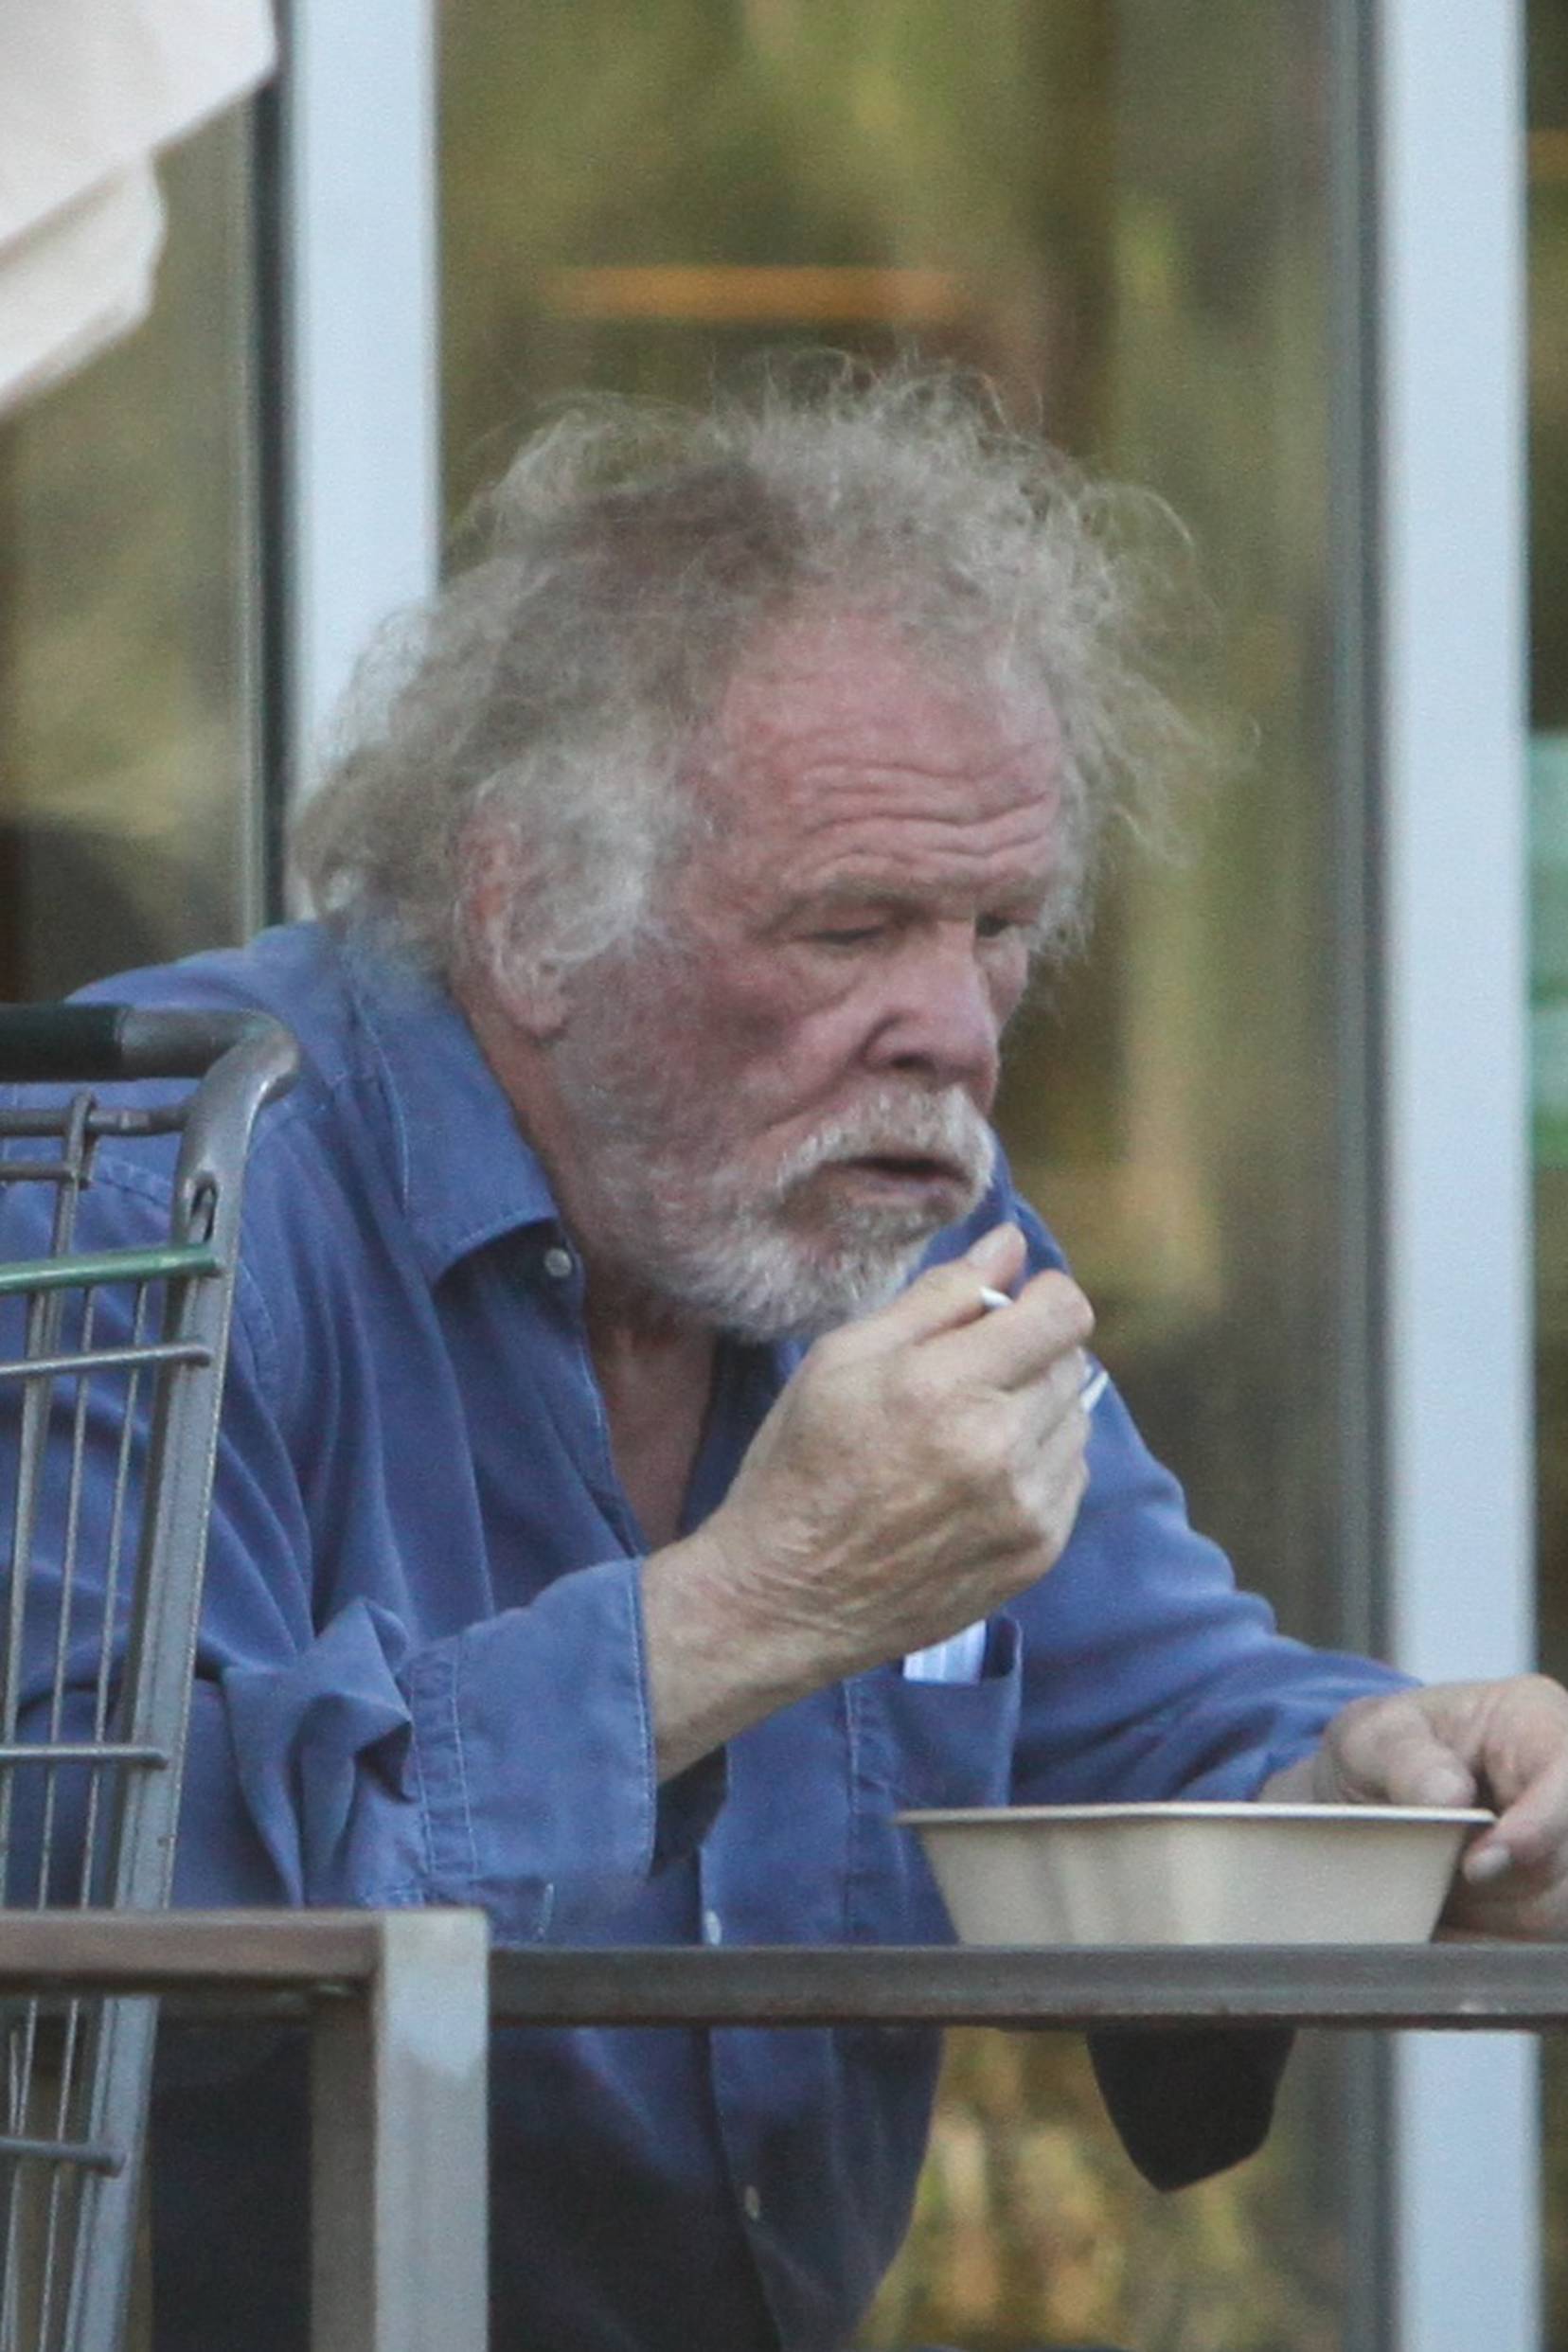 EXCLUSIVE: Nick Nolte has lunch and a smoothie with a friend while grocery shopping